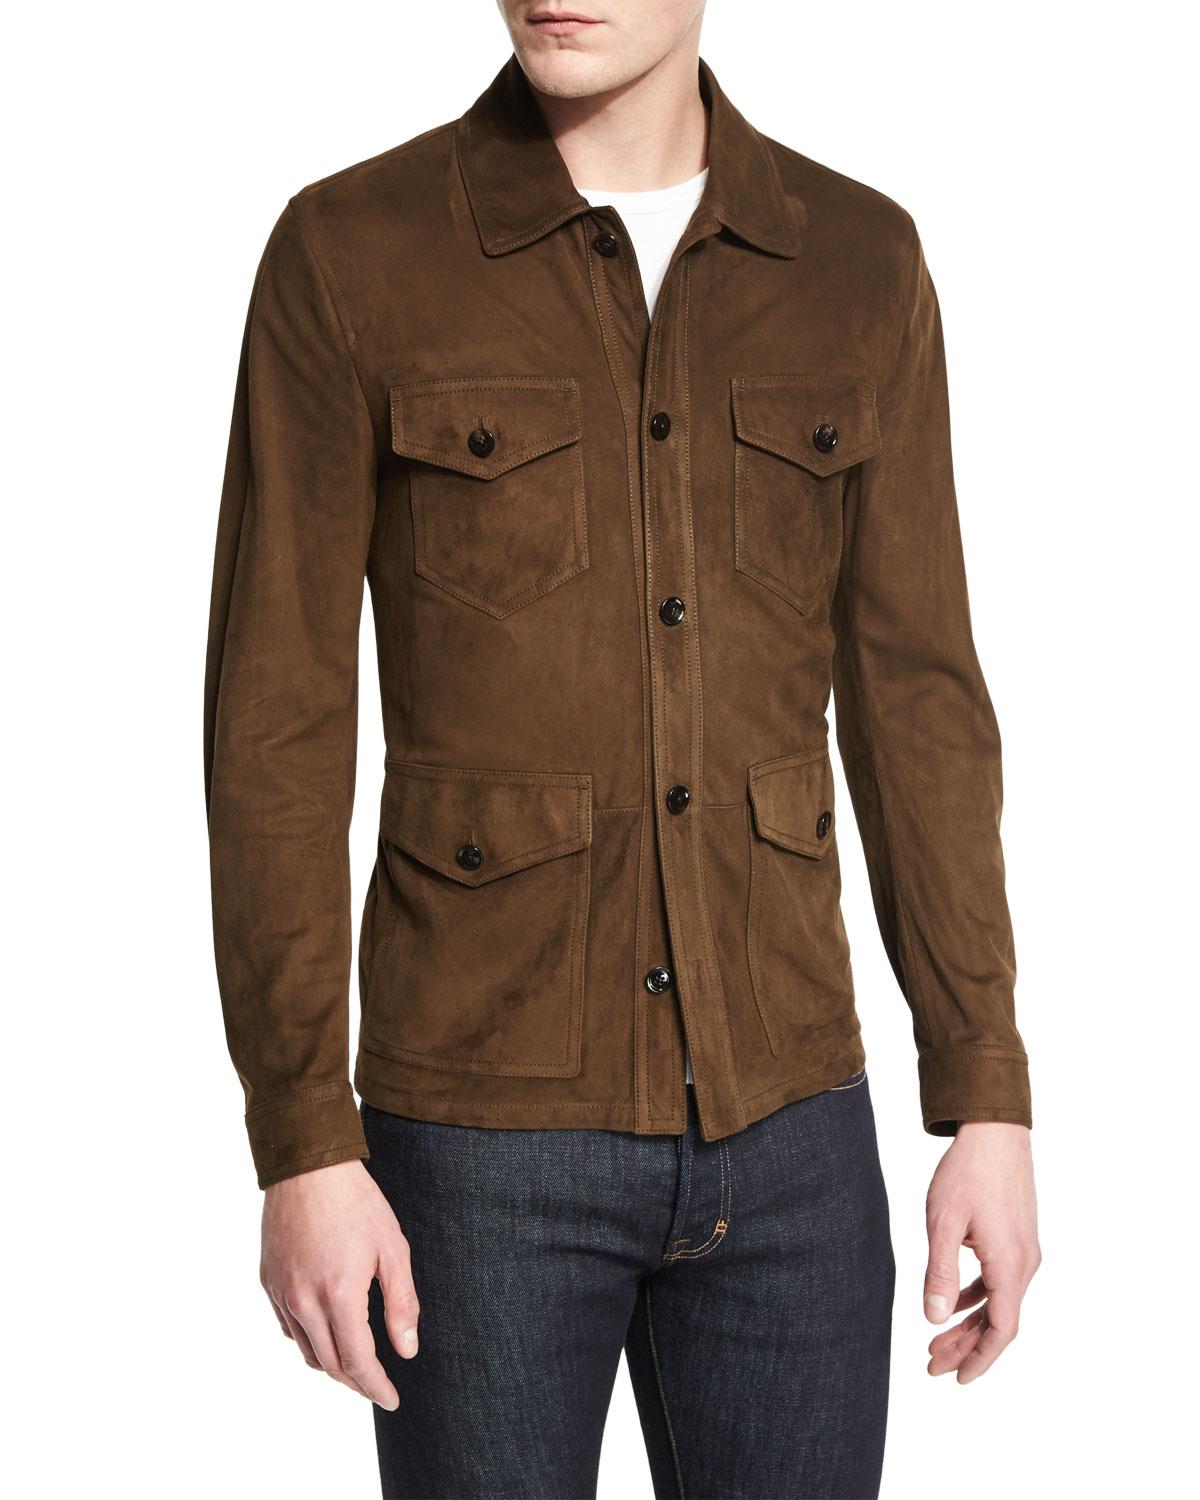 Tom ford Lightweight Suede Button Jacket in Brown for Men | Lyst